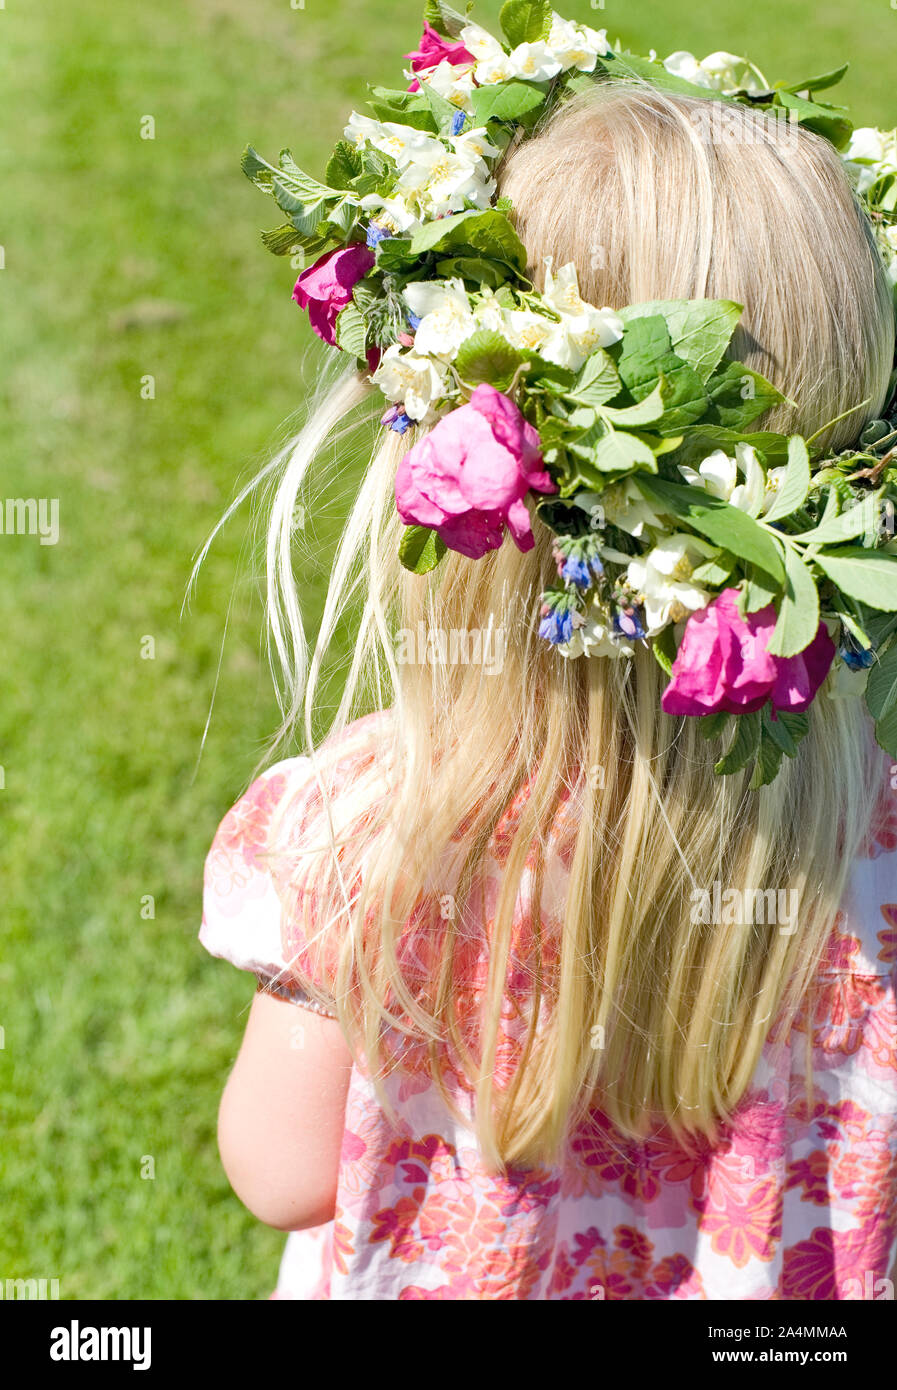 Girl wearing flower wreath Banque D'Images